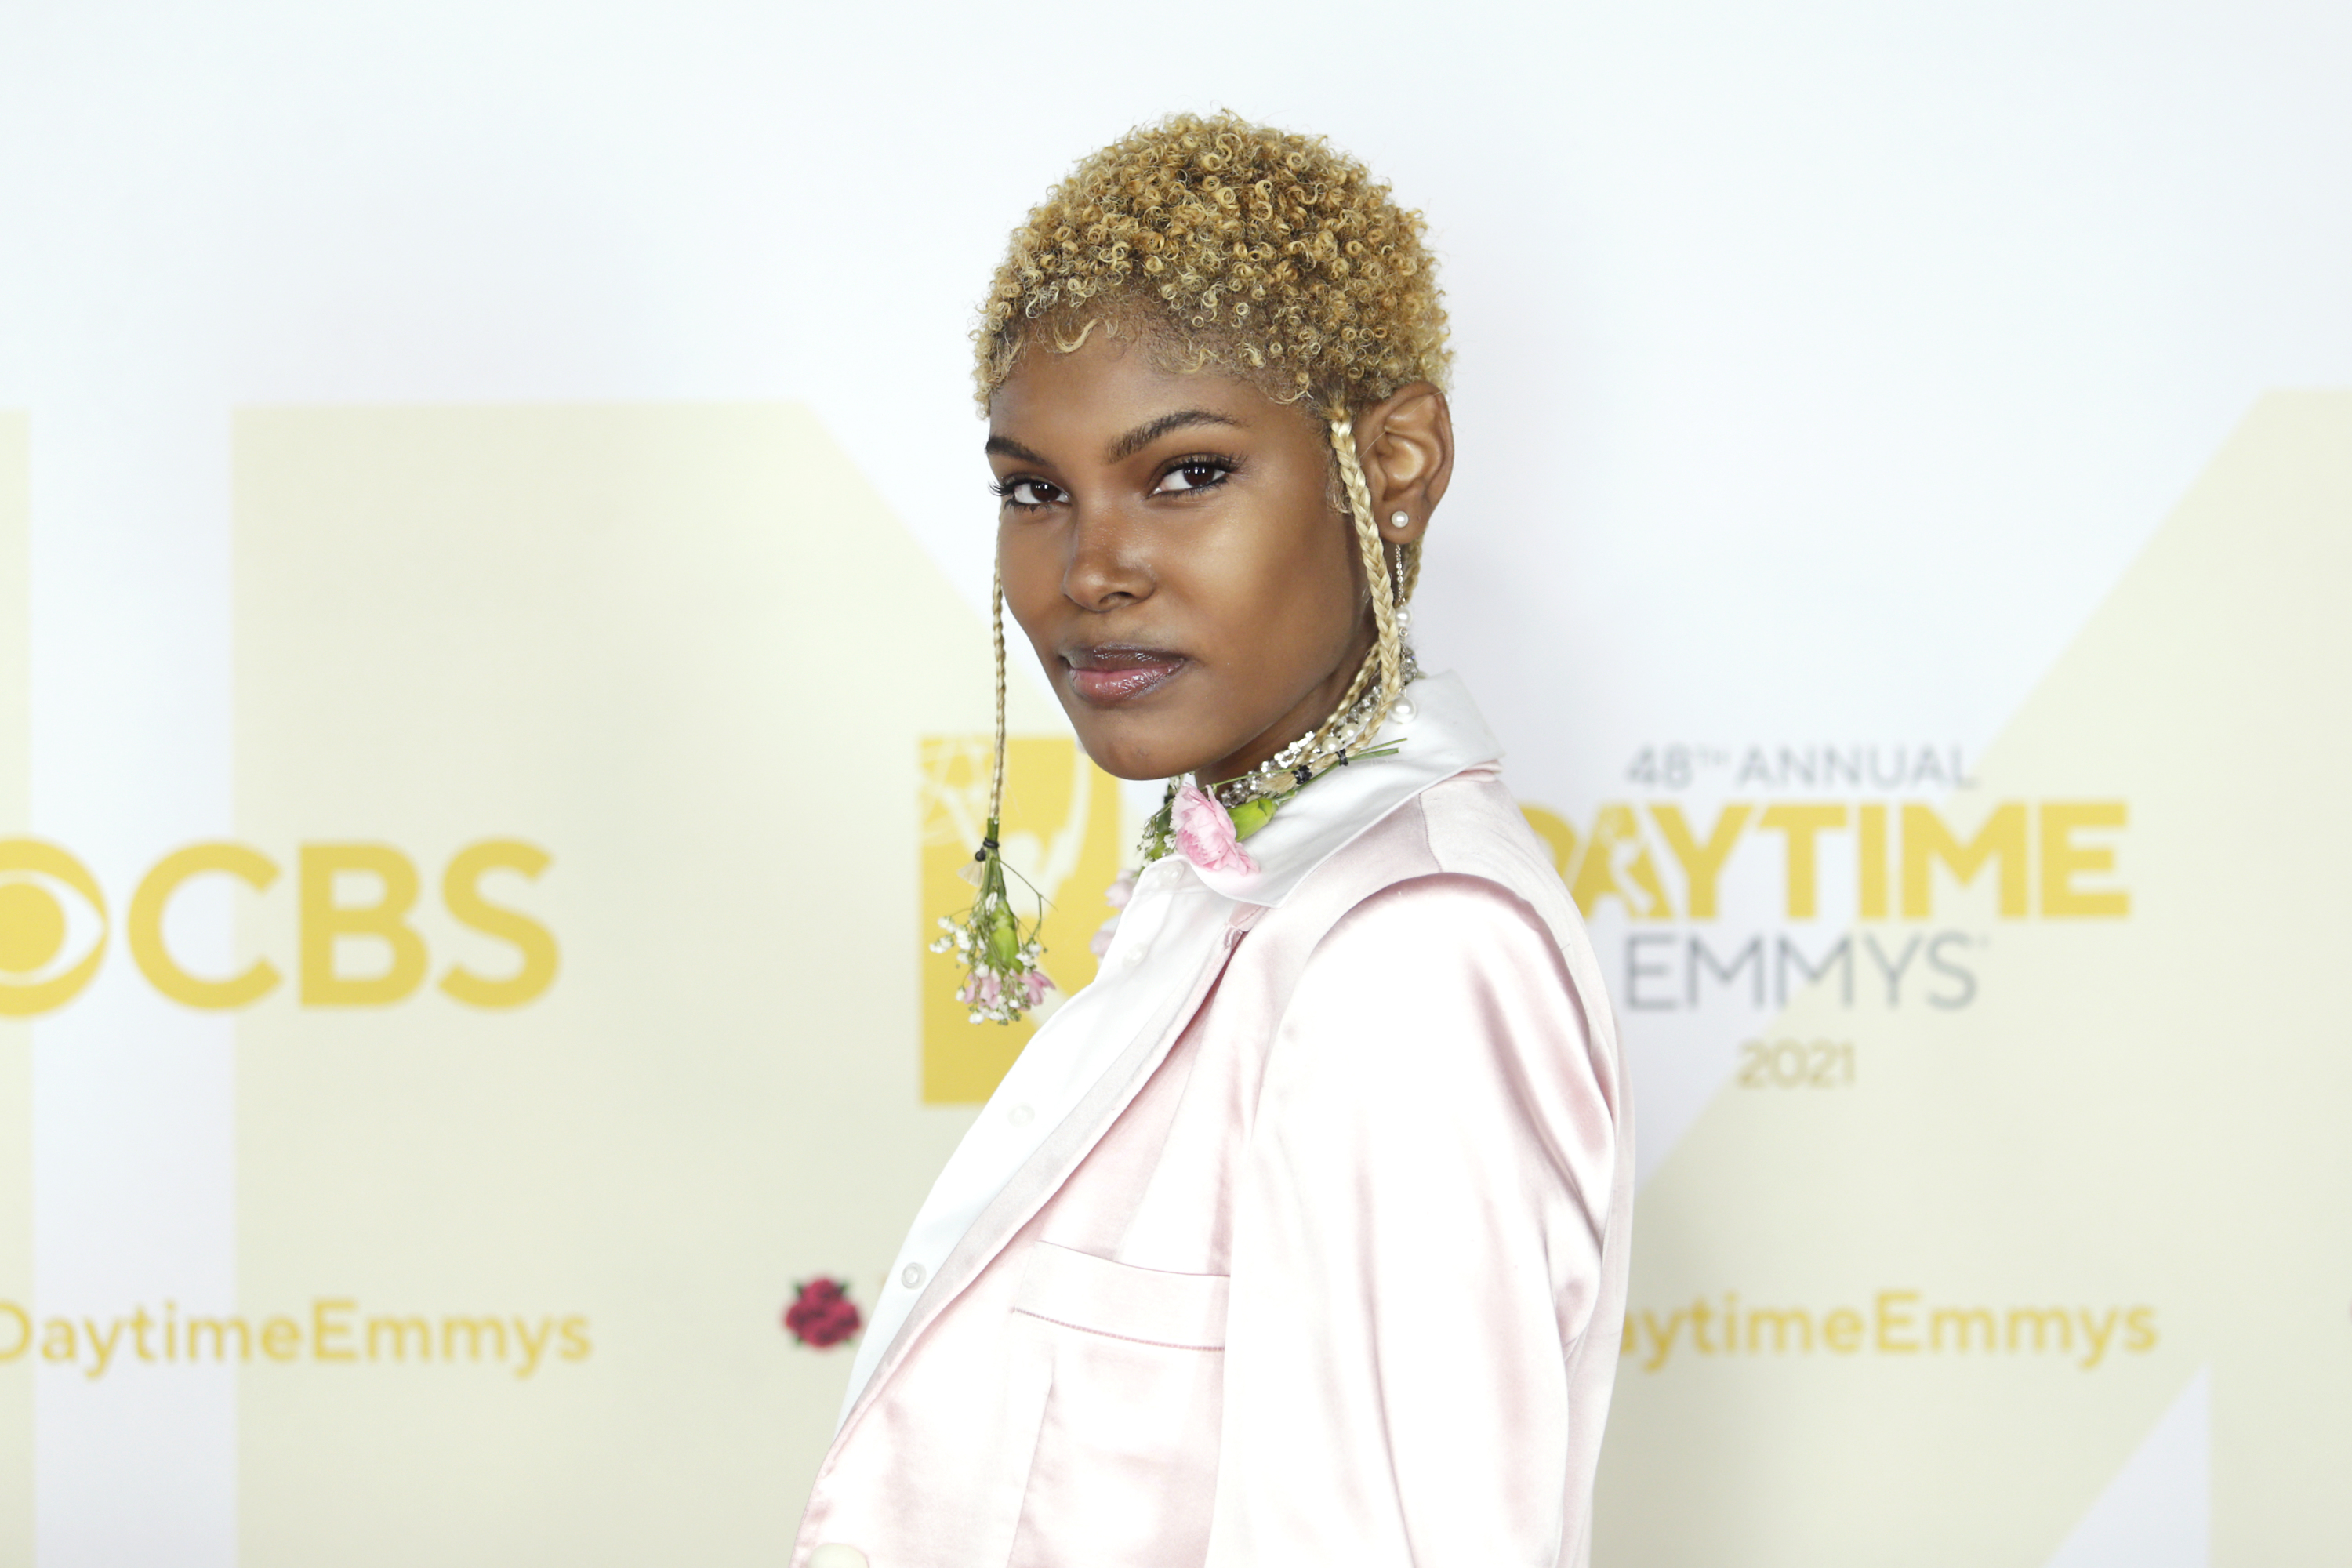 'The Bold and the Beautiful' actor Diamond White wearing a light pink jacket during a red carpet appearance.